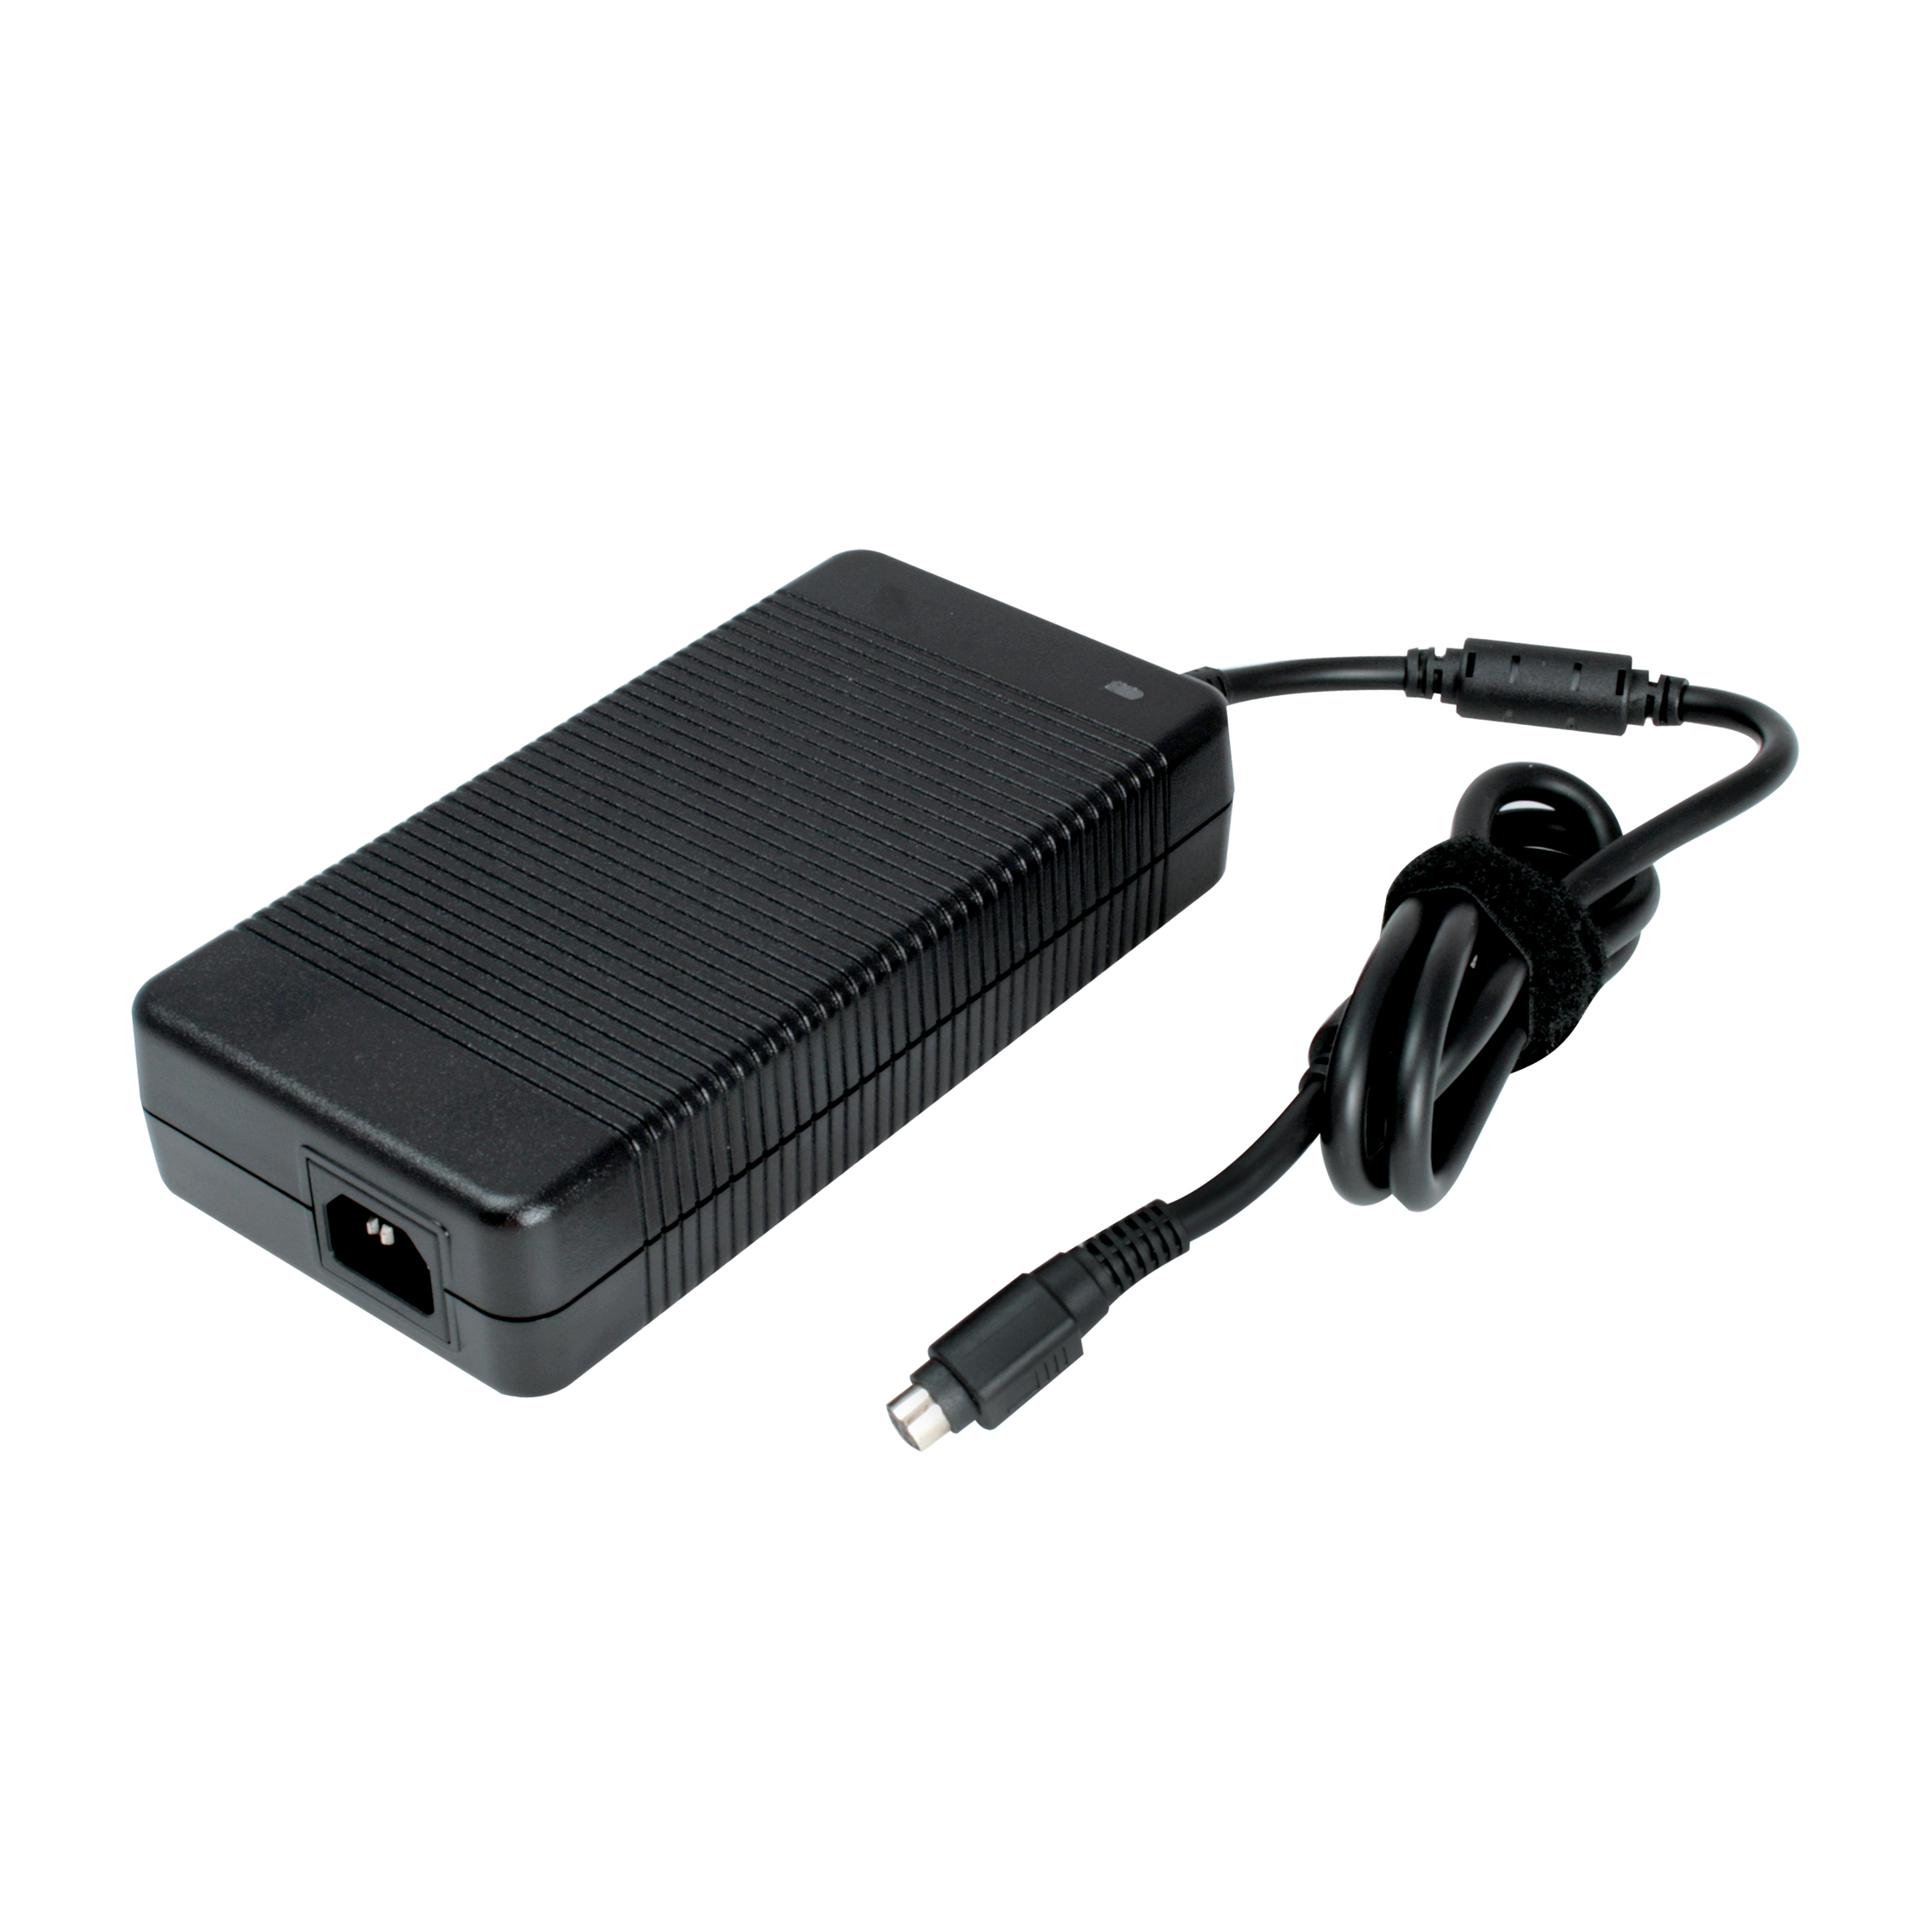 Additional 230W power adapter